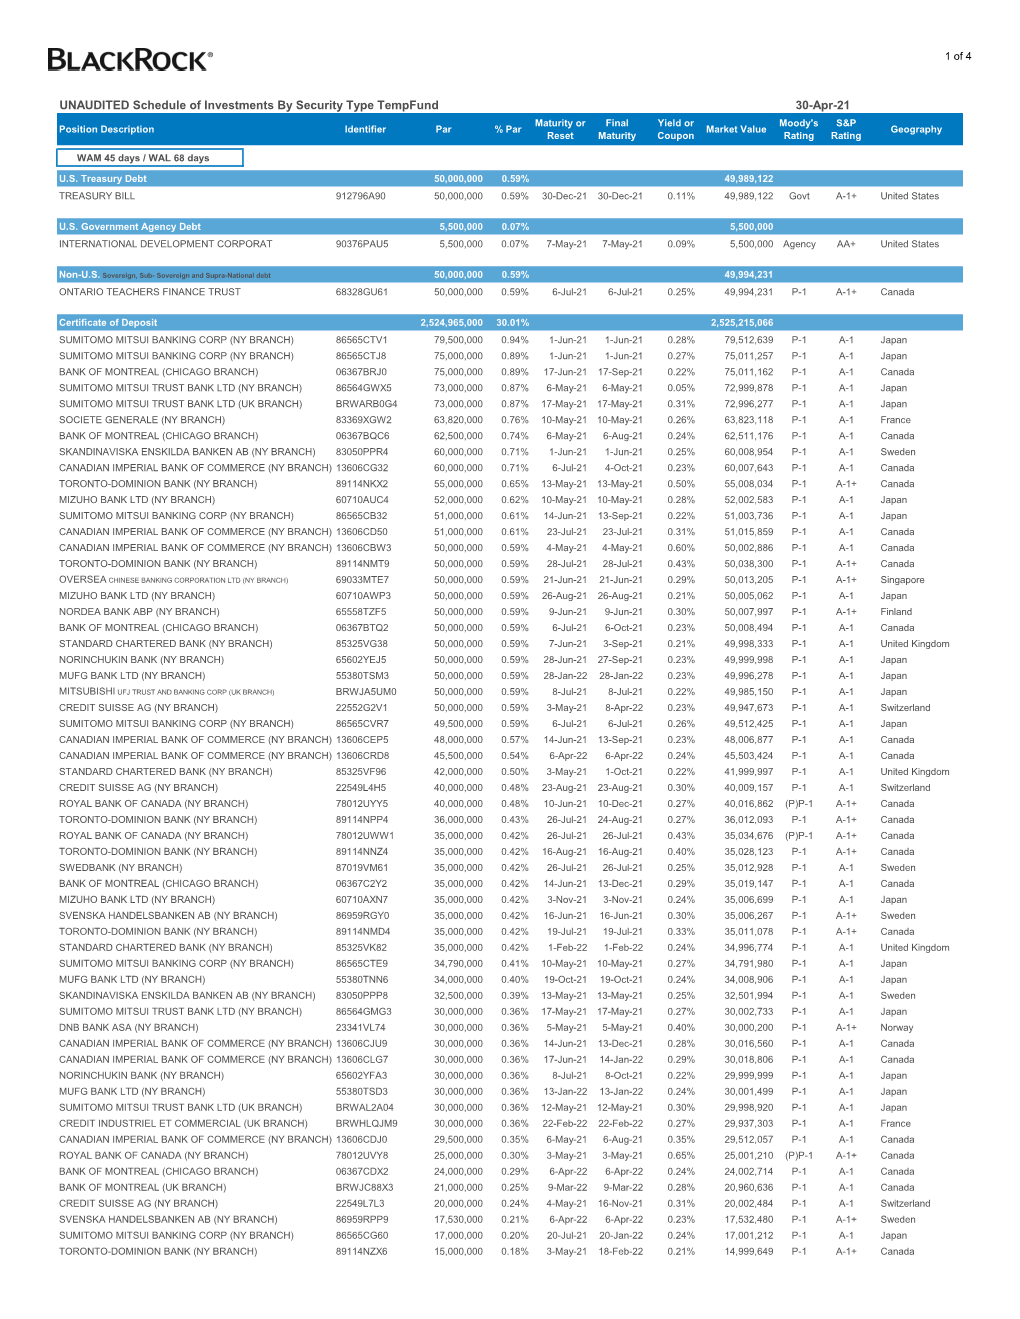 UNAUDITED Schedule of Investments by Security Type Tempfund 30